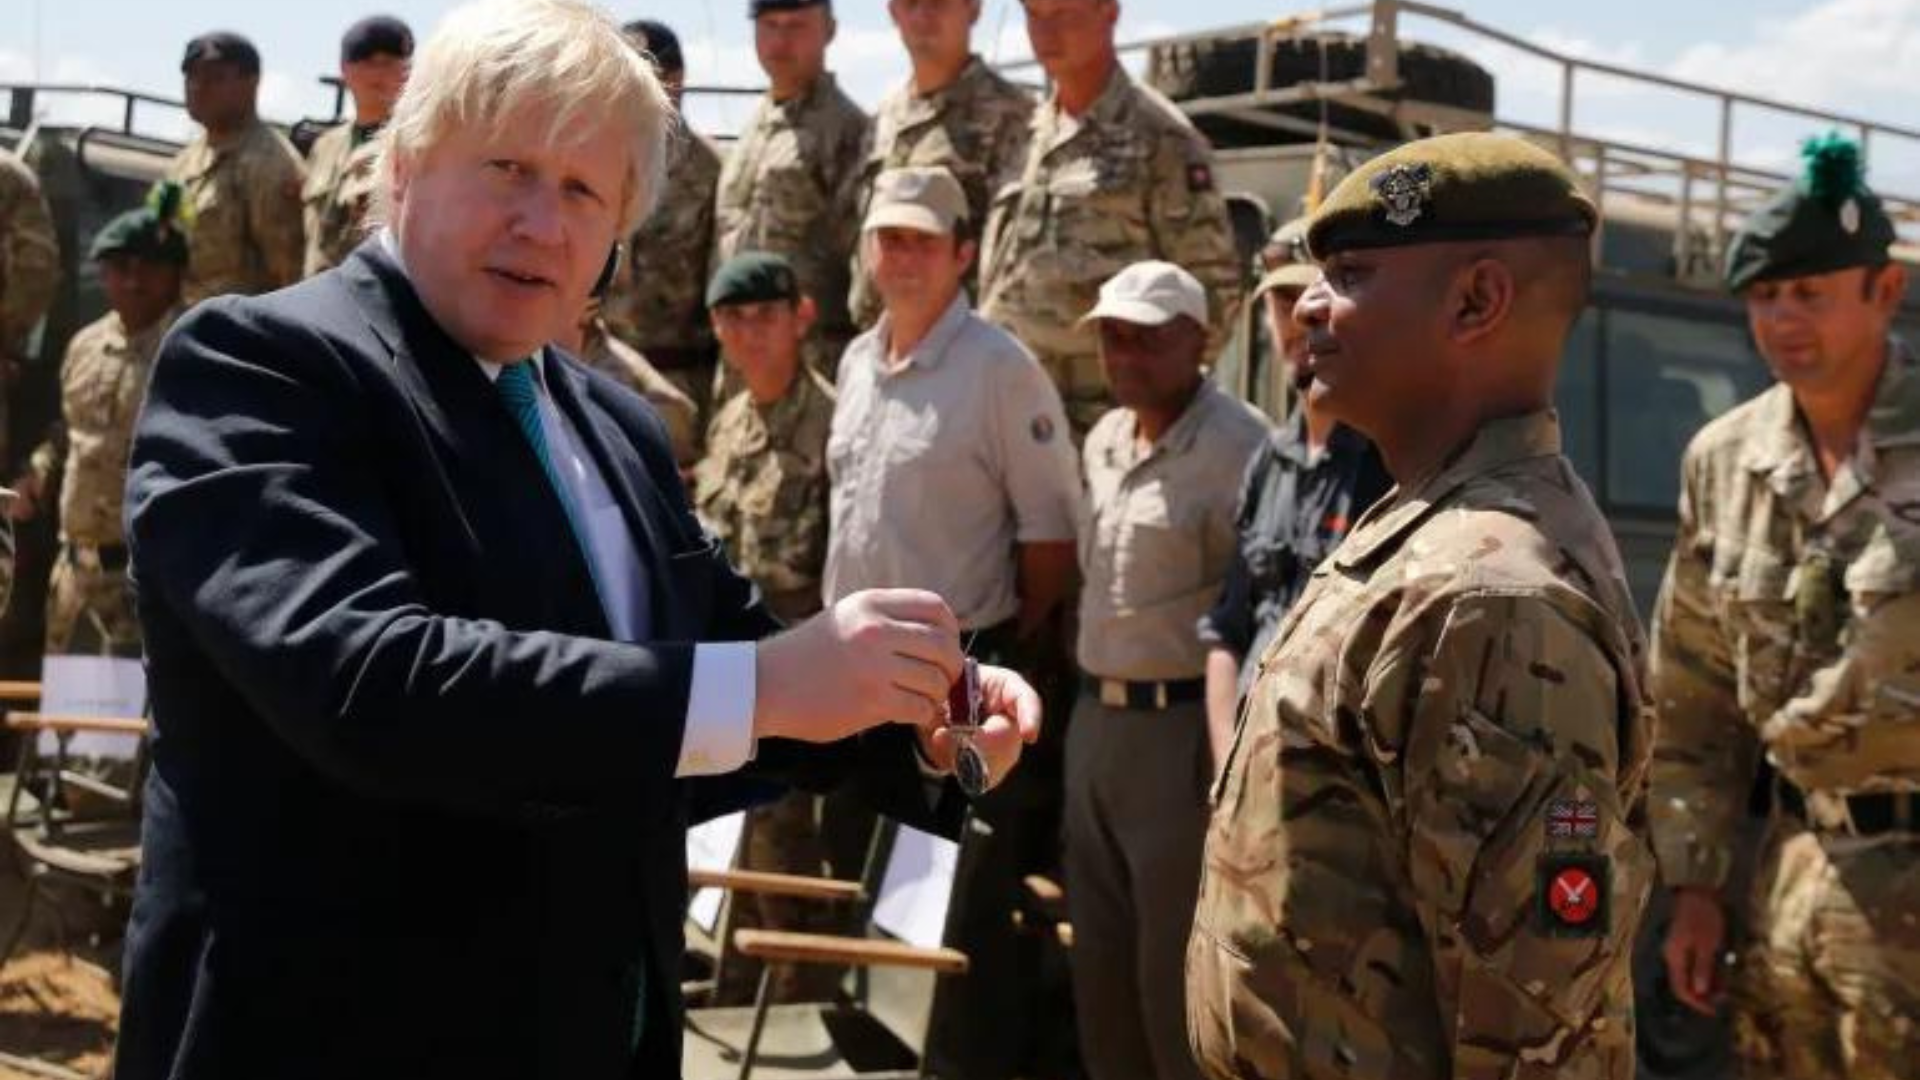 Explained: Why is Kenya investigating alleged abuse by UK soldiers?